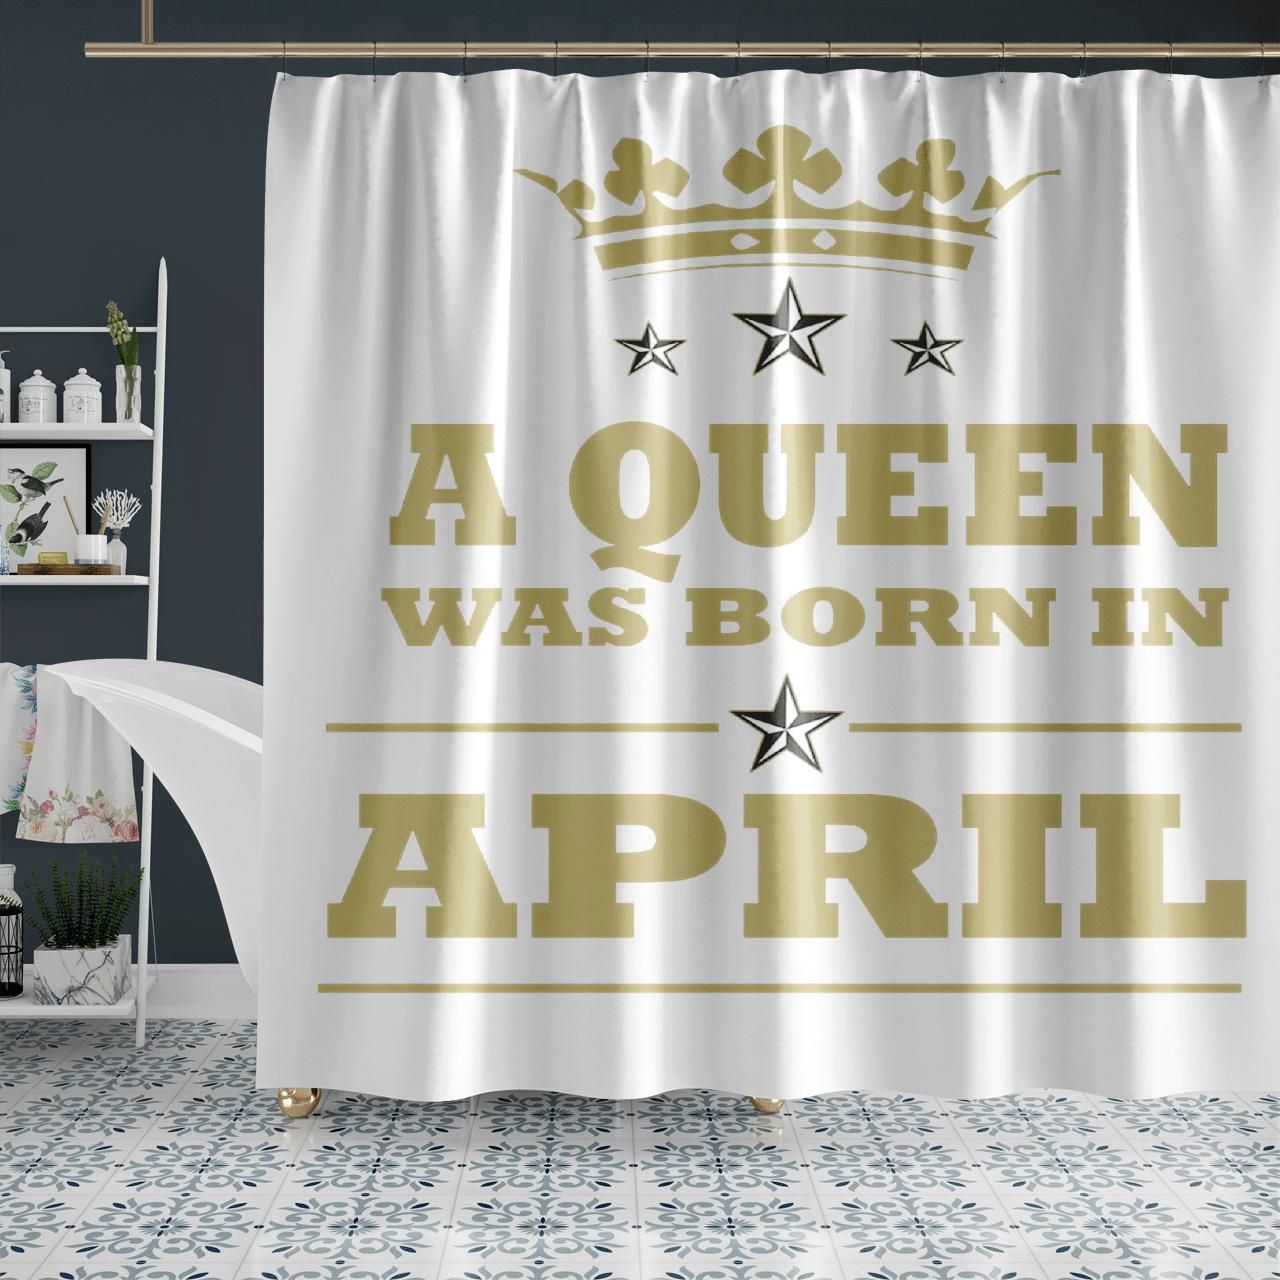 A Queen Was Born In April Shower Curtain